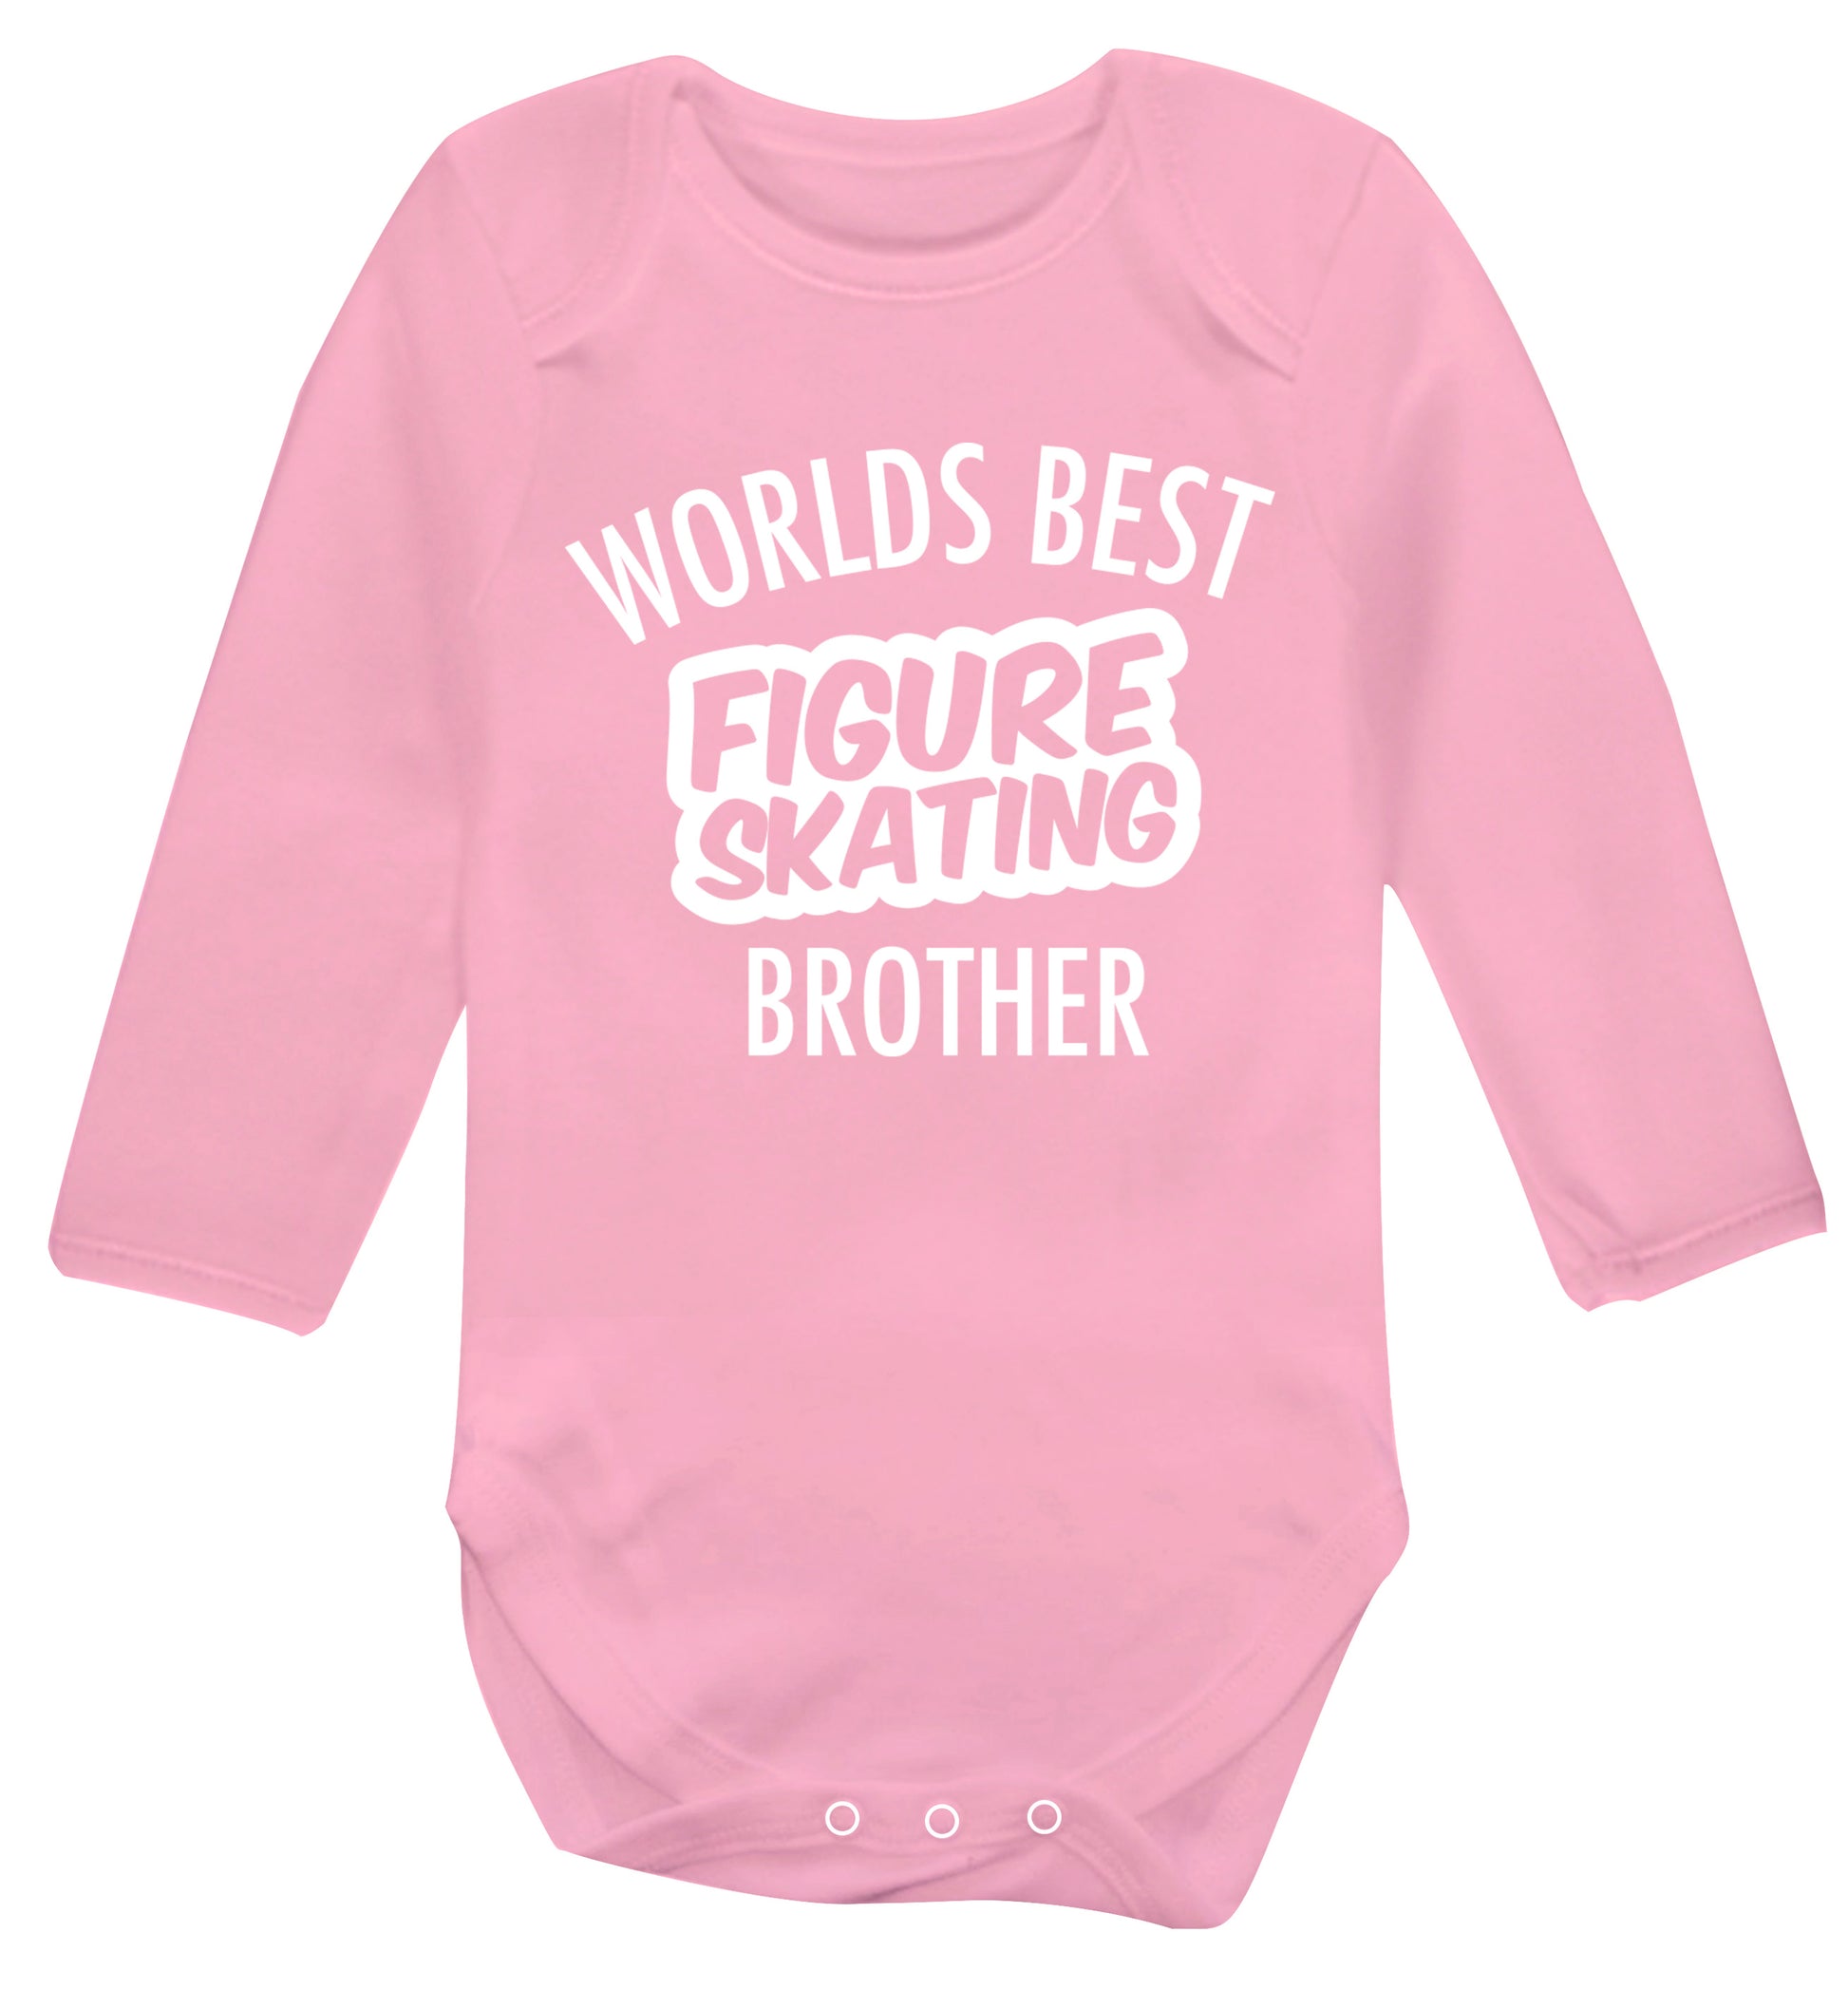 Worlds best figure skating brother Baby Vest long sleeved pale pink 6-12 months